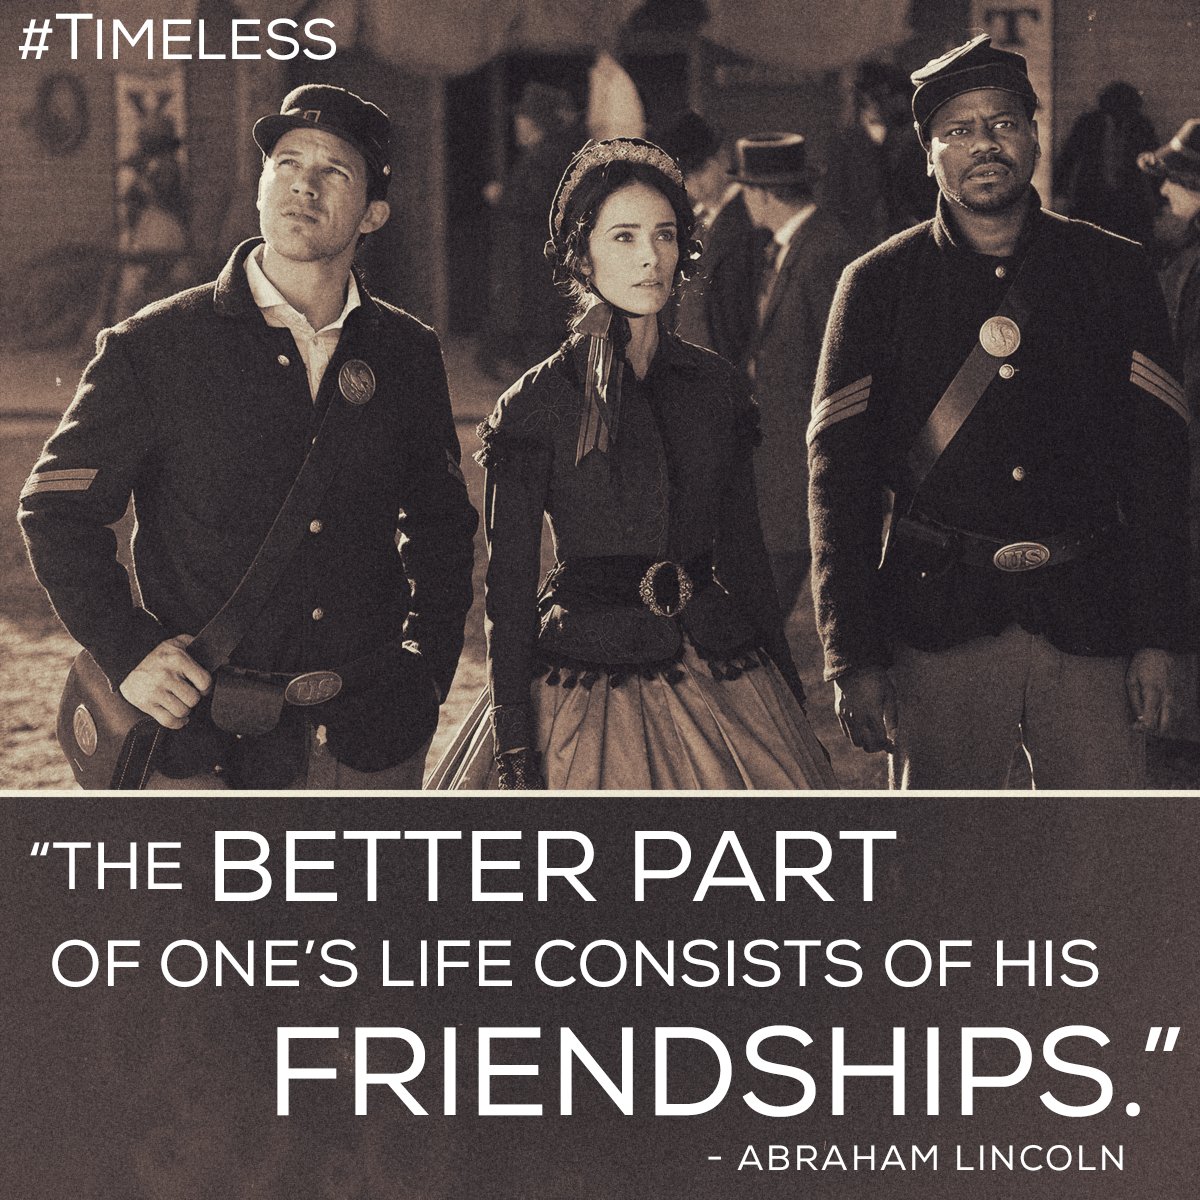 RT @ShawnRyanTV: Looking forward to our time at the Smithsonian today! #Timeless #RenewTimeless https://t.co/T5CoVStCgE